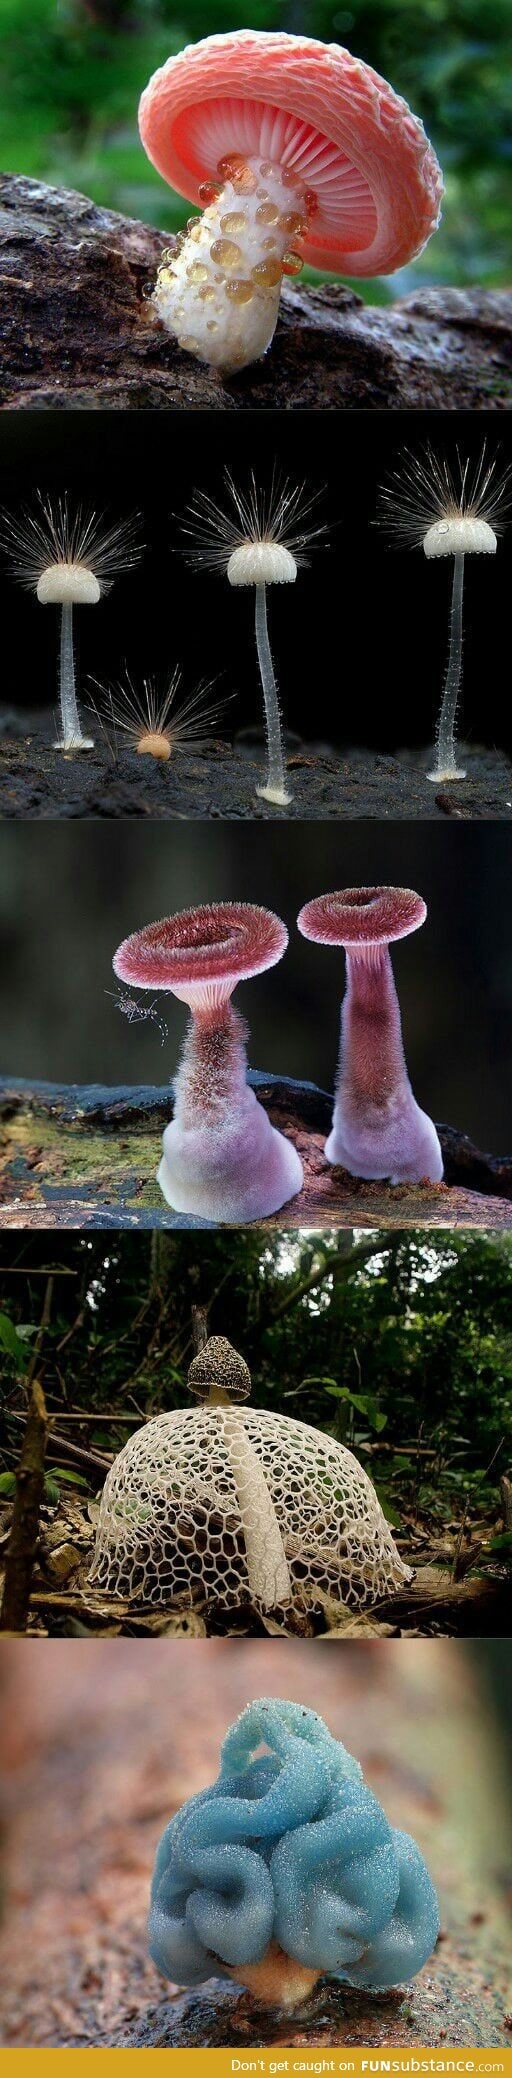 Behold these beautiful mushrooms